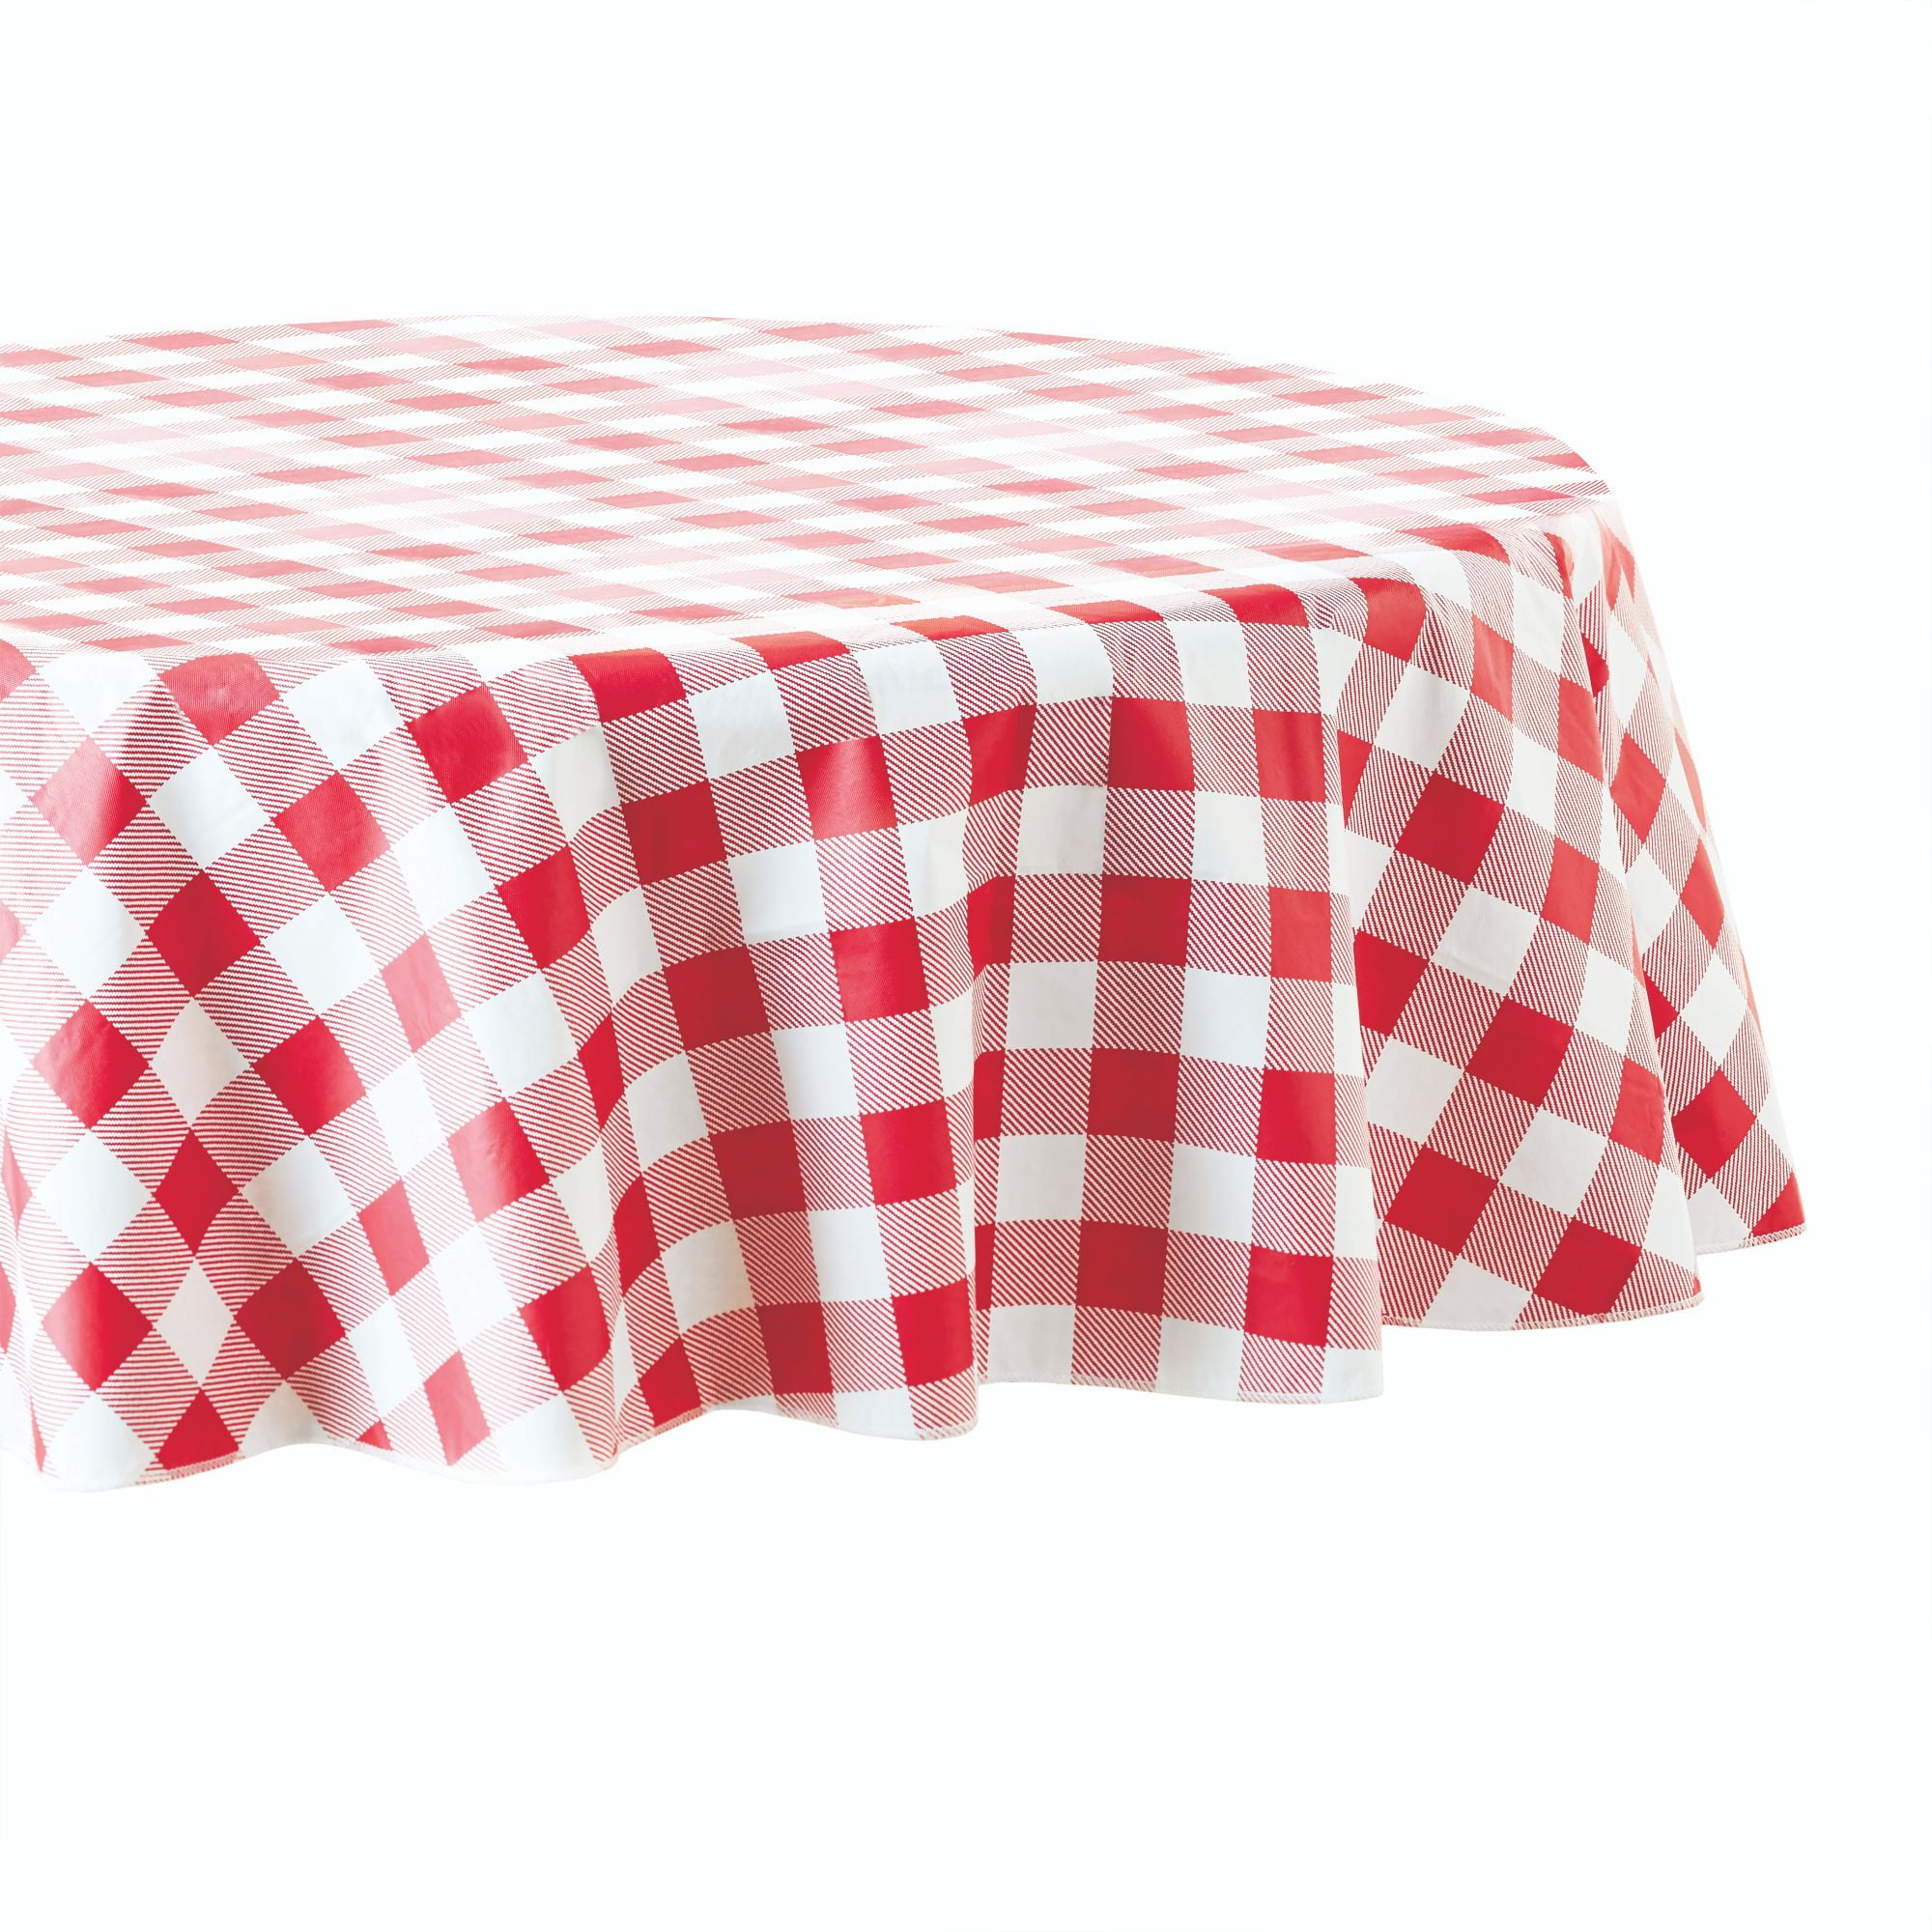 Mainstays Red Check Vinyl Tablecloth, 70" Round, Red